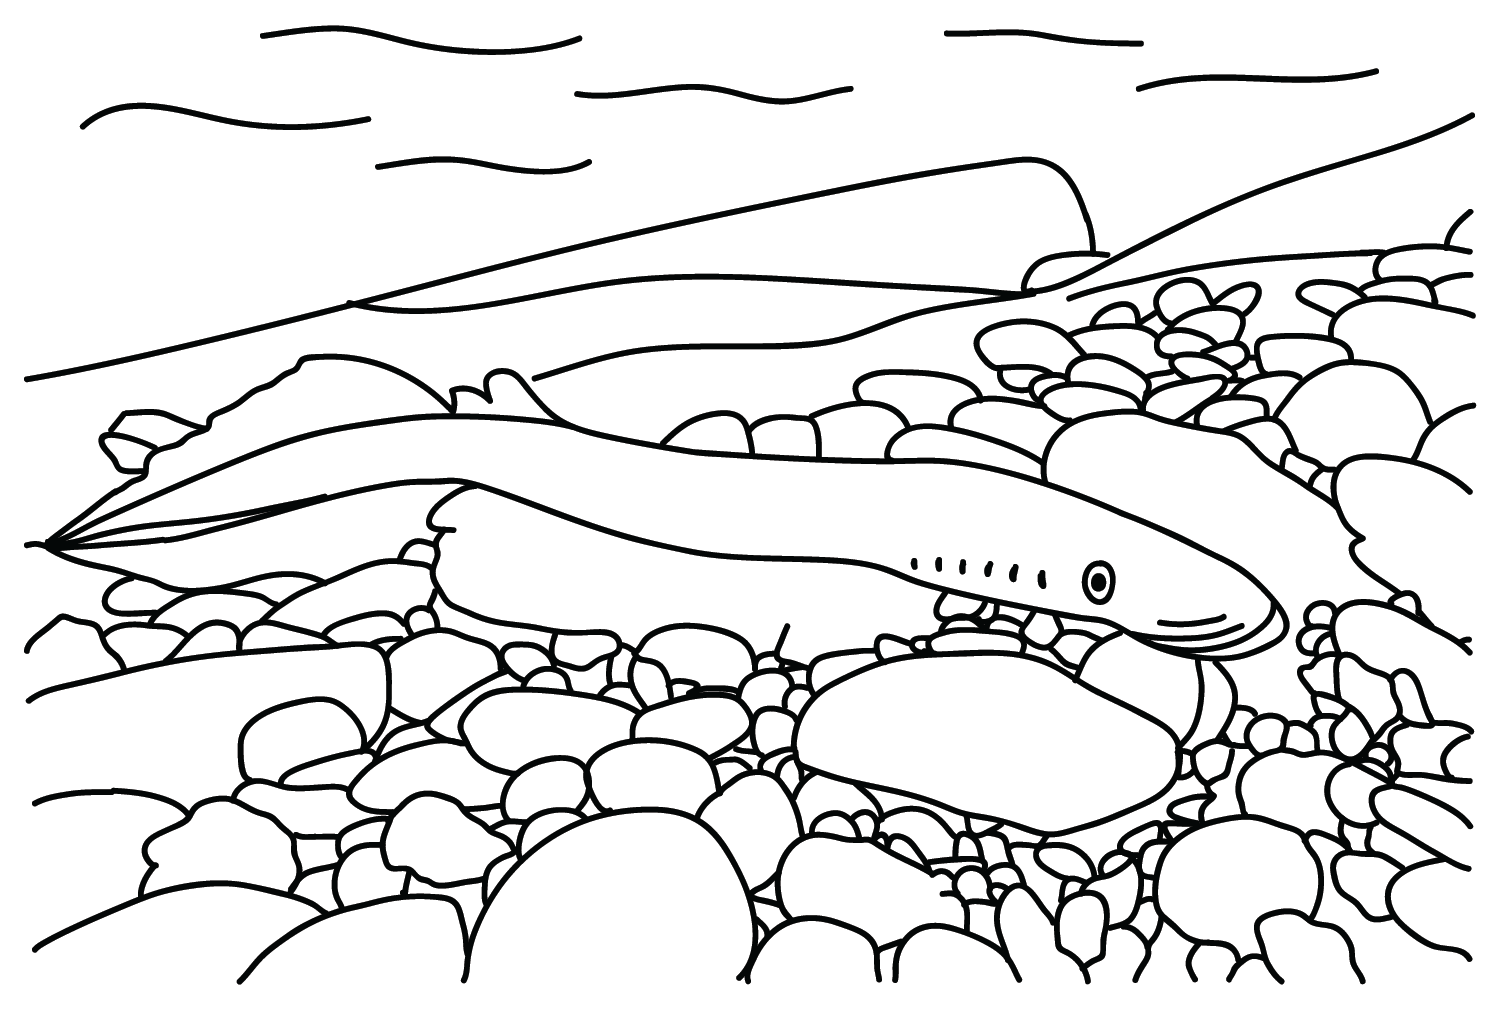 Lamprey Art Coloring Page - Free Printable Coloring Pages